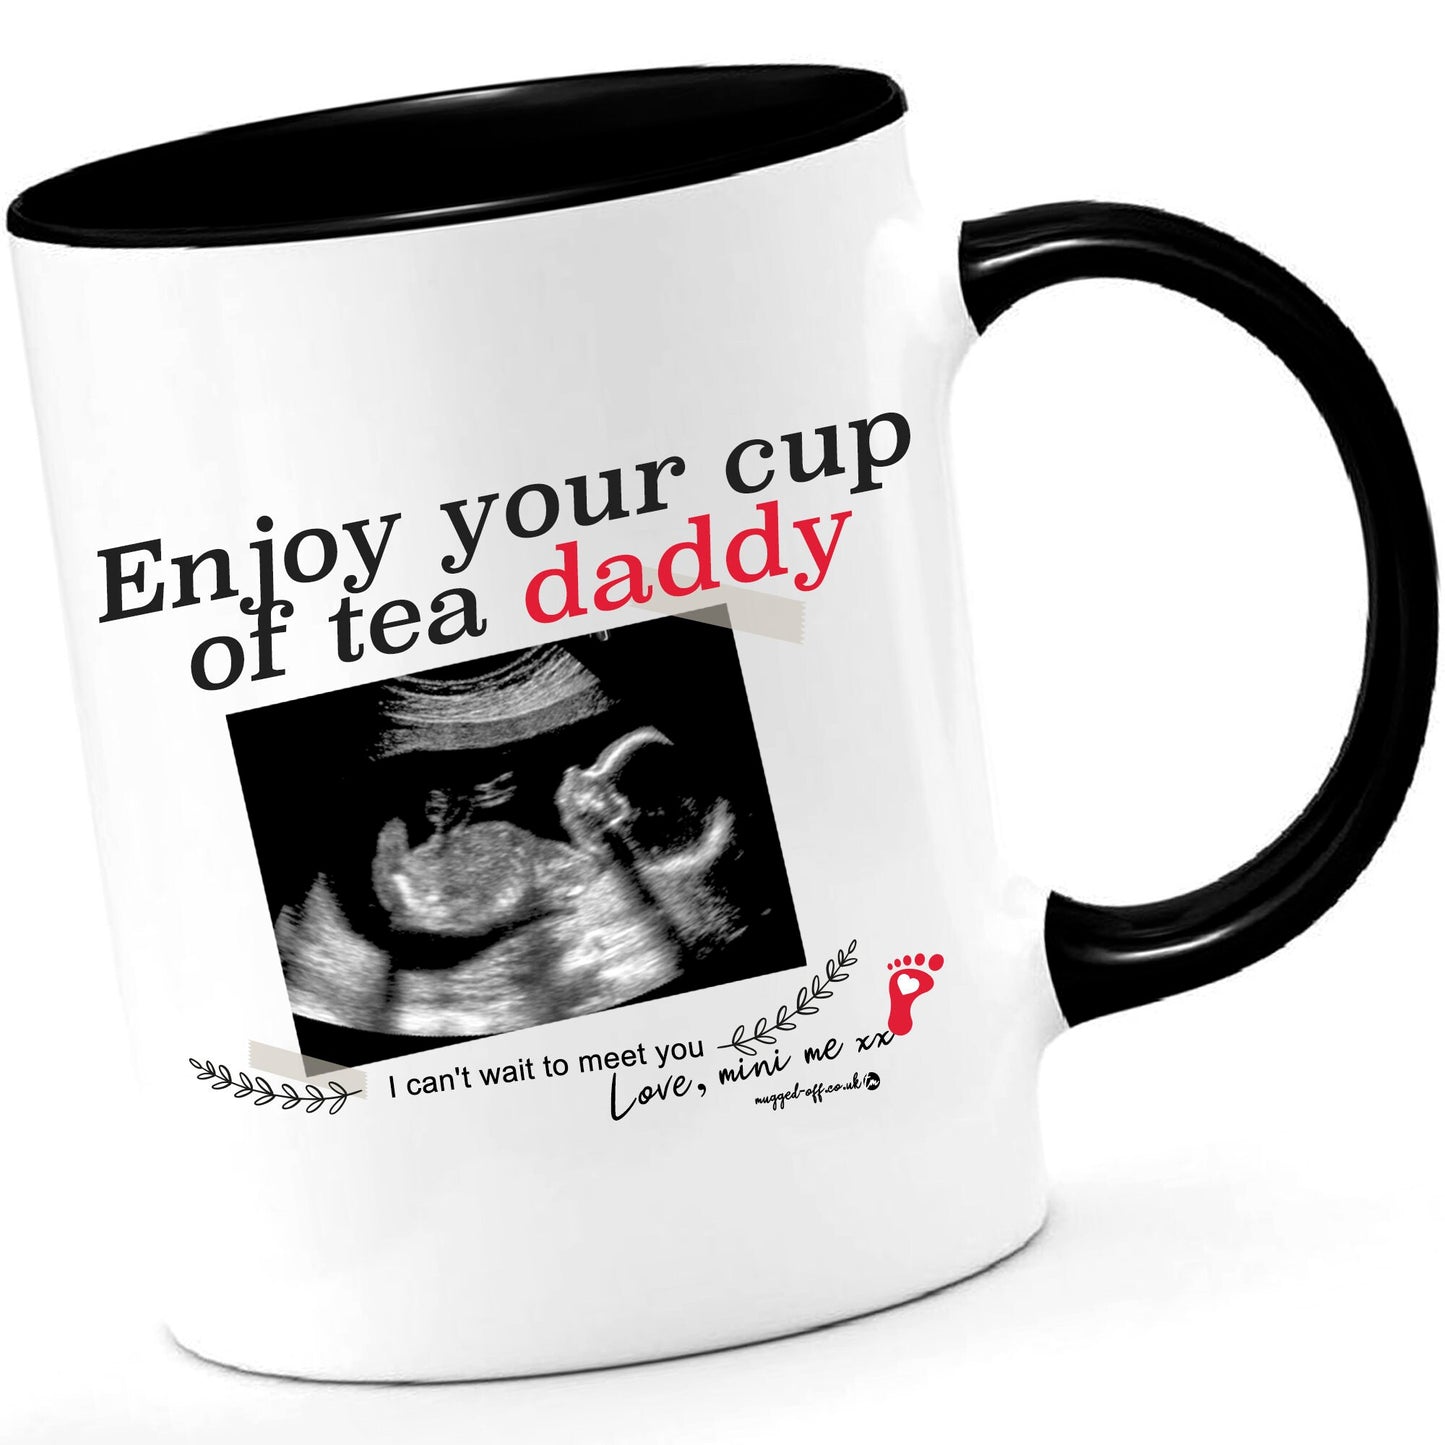 Dad to be - New Baby Scan Mug Dad Parents - PERSONALISED with baby scan picture